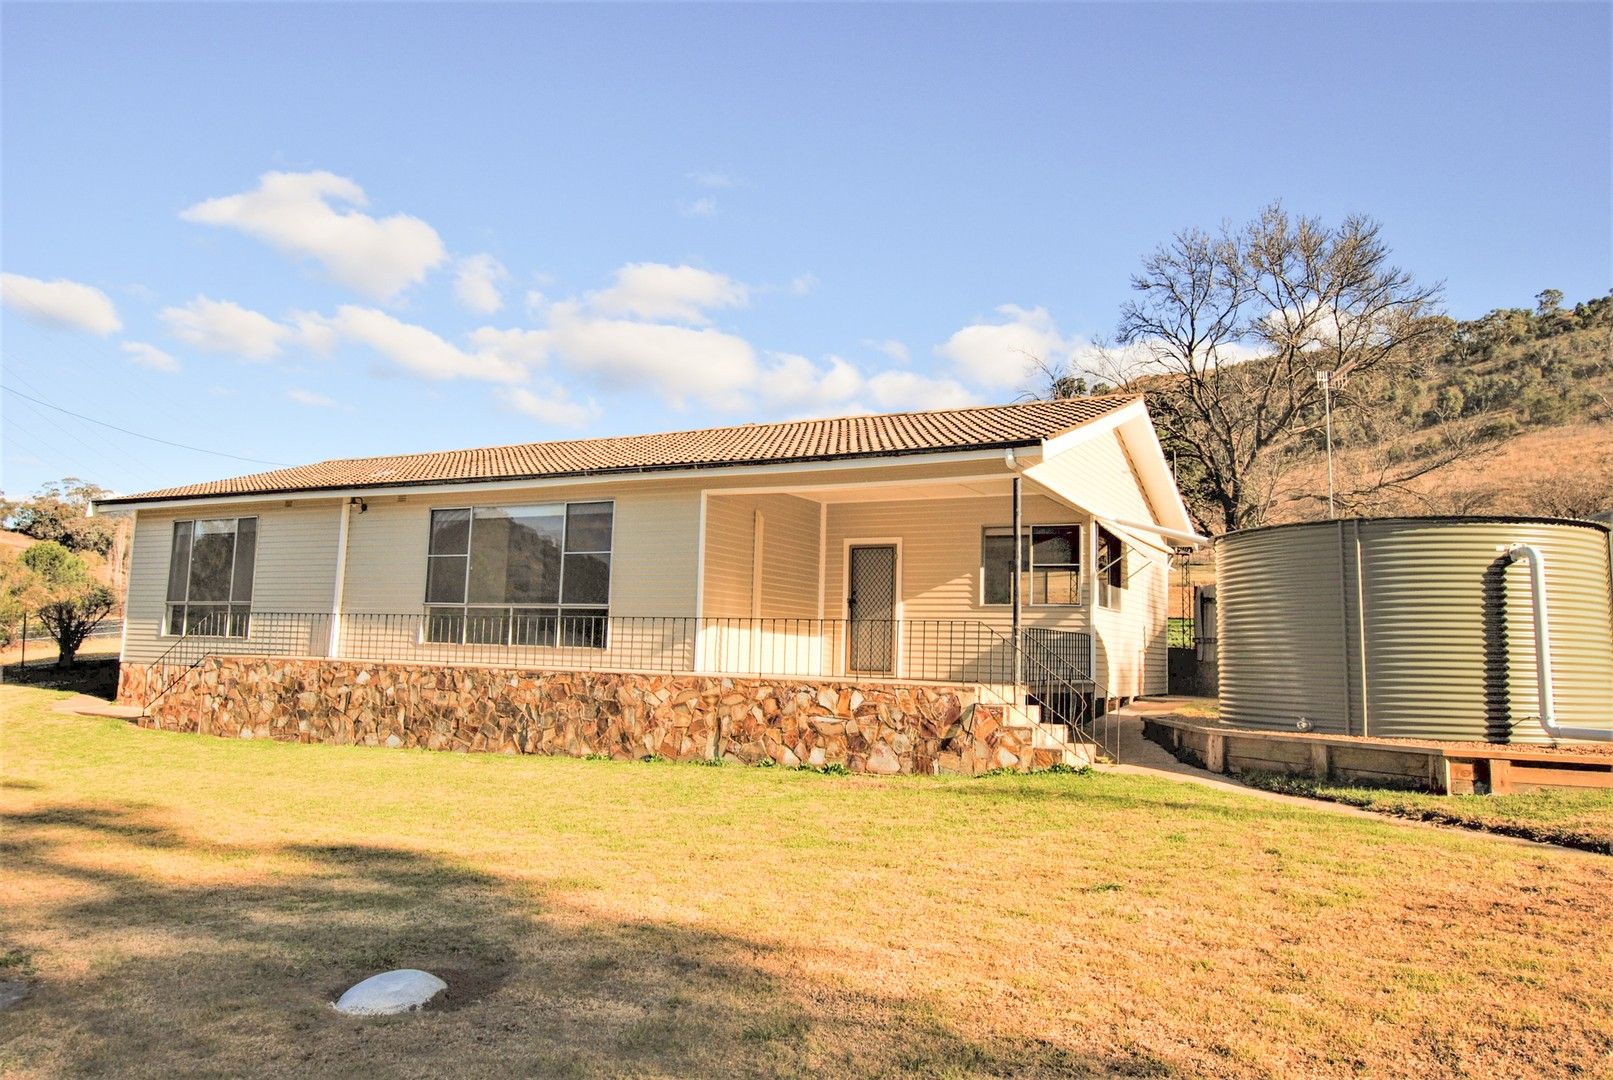 3 bedrooms House in 1106 Castlereagh Highway MUDGEE NSW, 2850